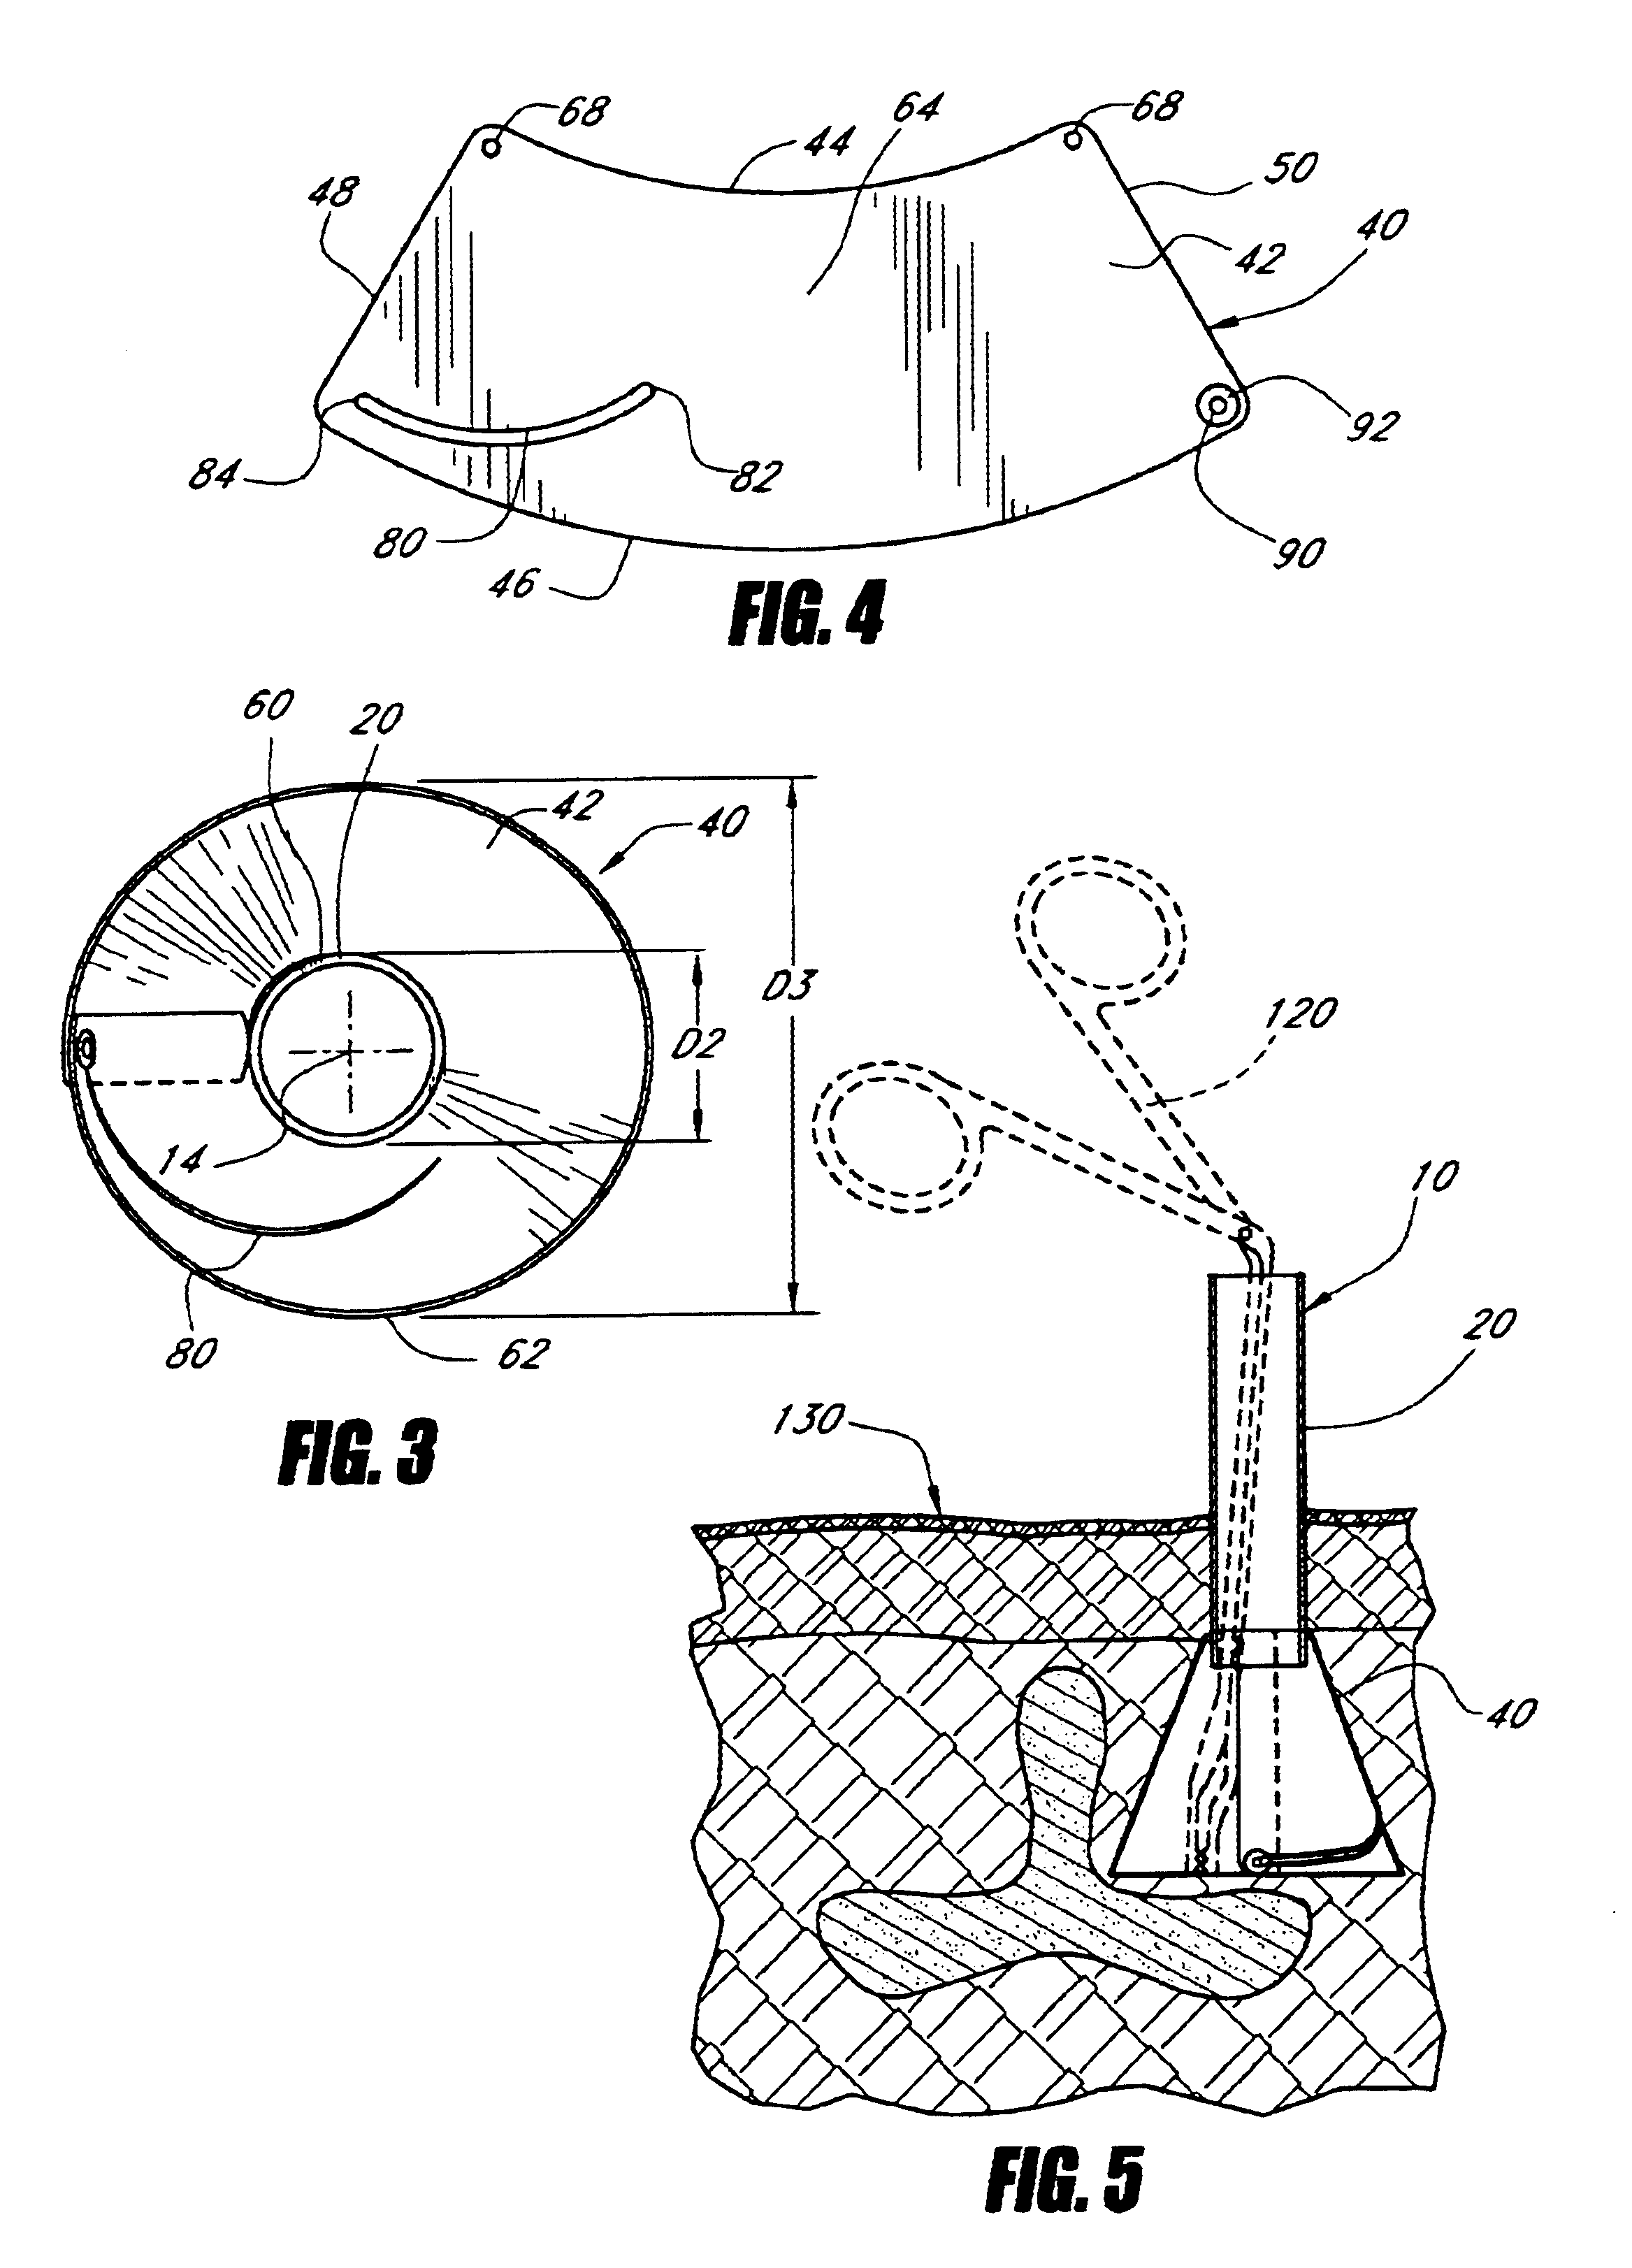 Cannula for receiving surgical instruments